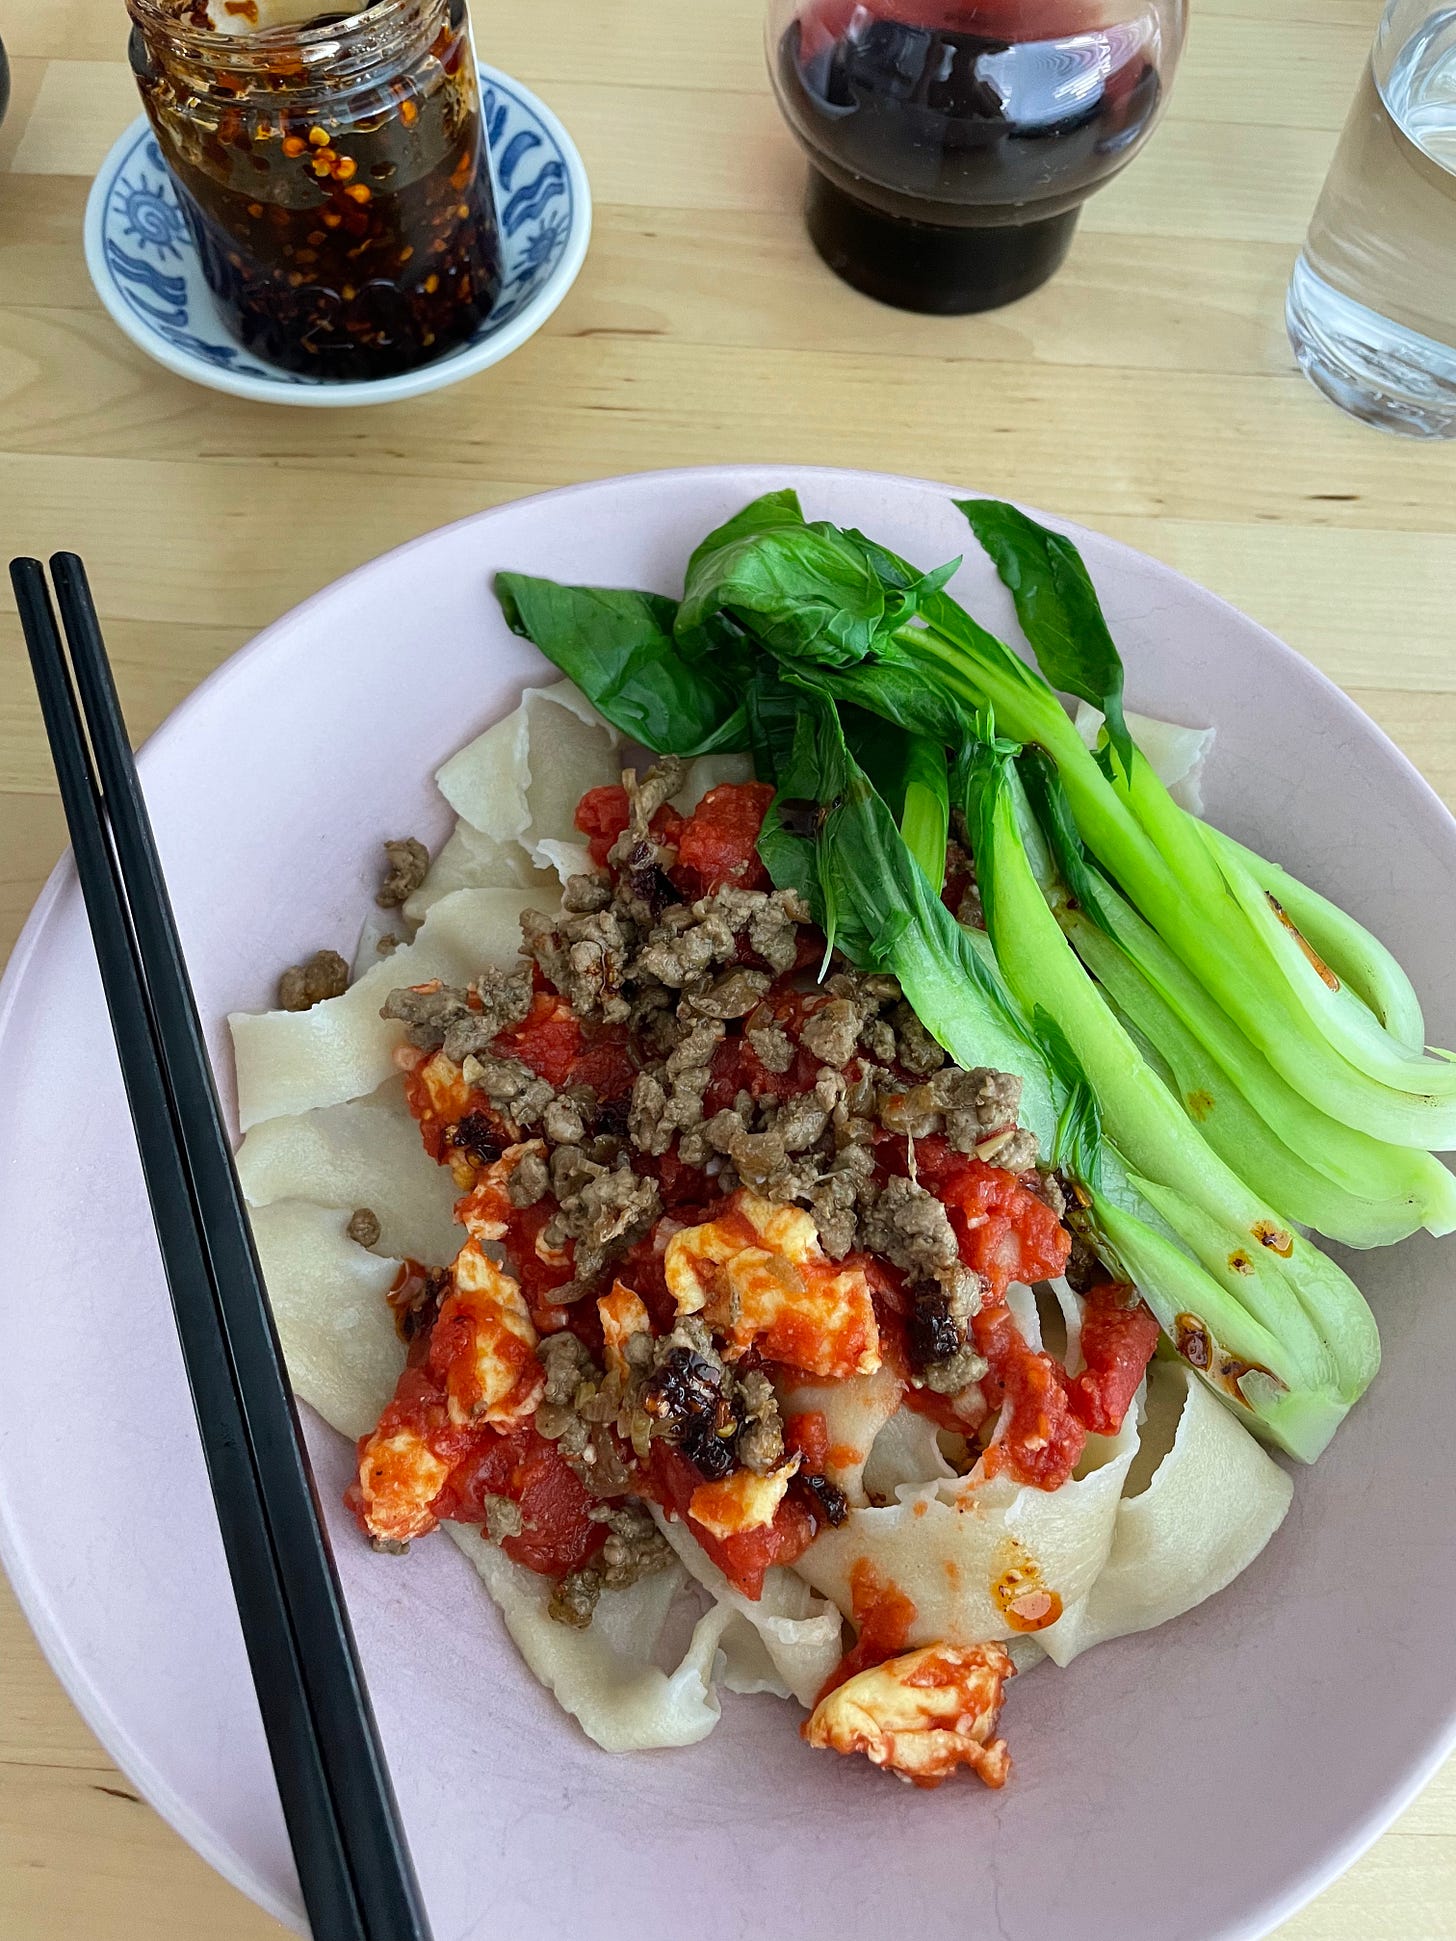 Hand ripped noodles topped with tomato and egg sauce, a side of baby bok choy and pork. Chopsticks and chilli sauce nearby.